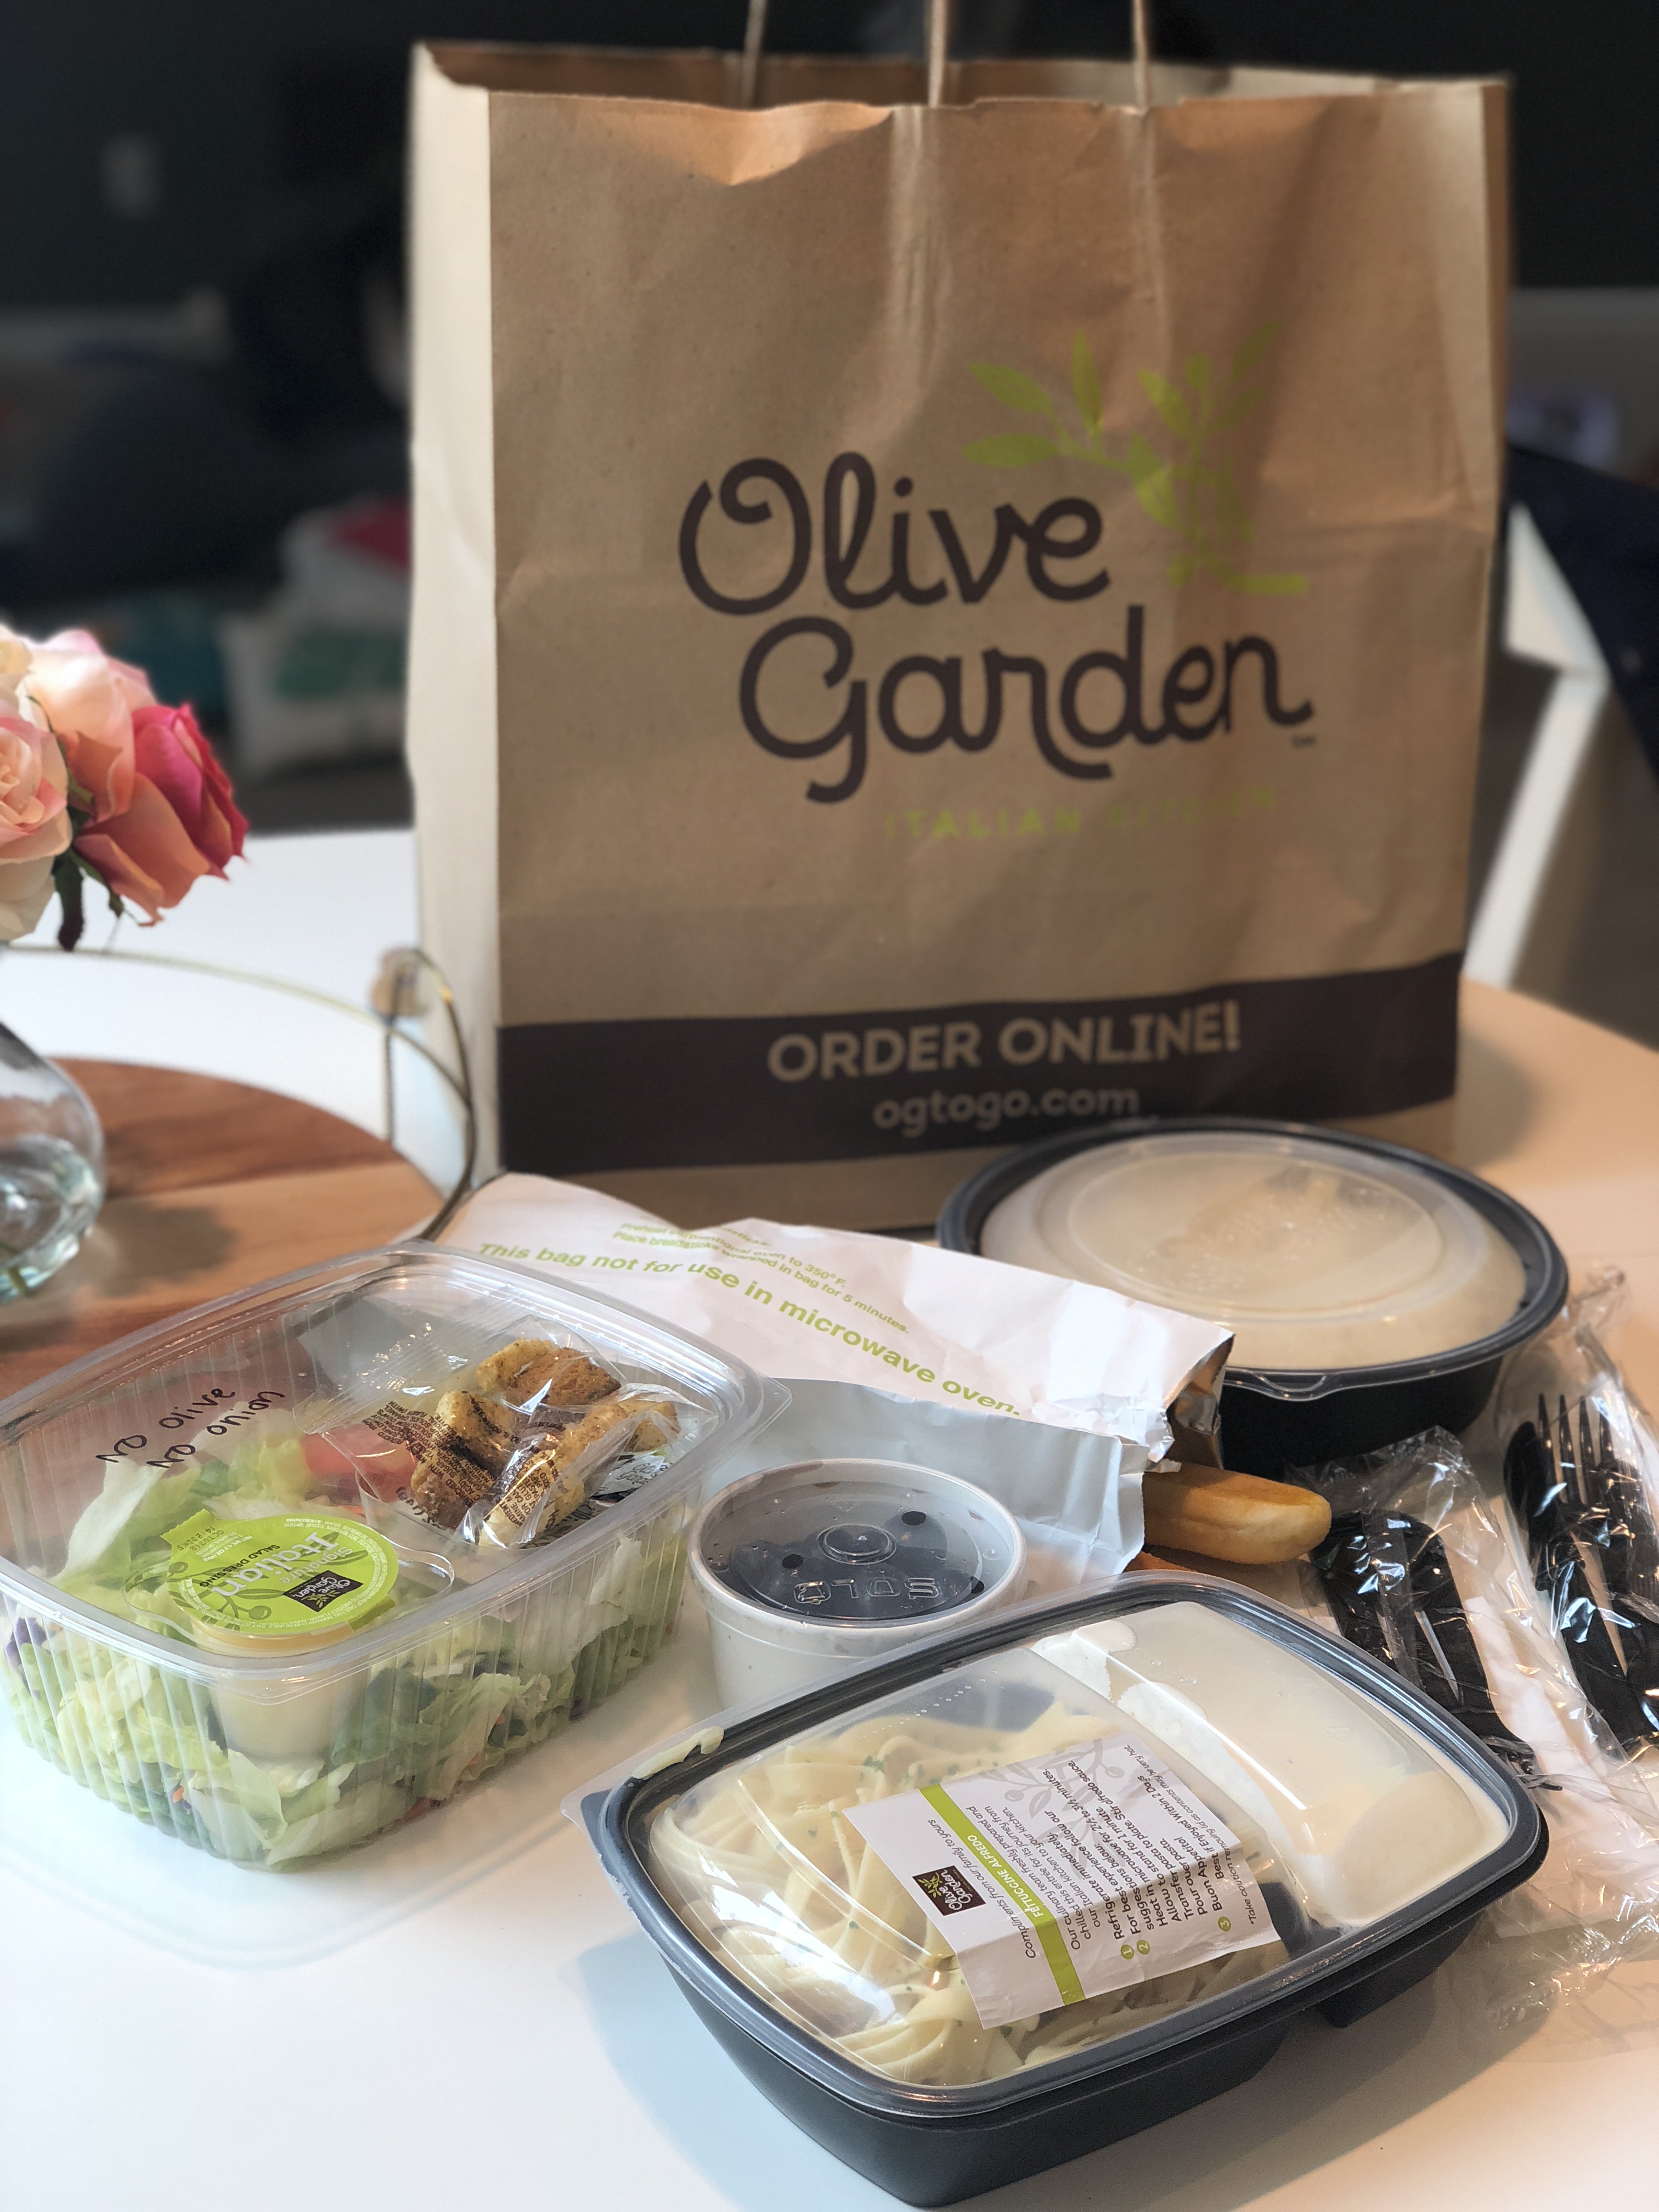 Olive Garden â€“ Dinner for Two Only $12.99 | Budget Savvy Diva